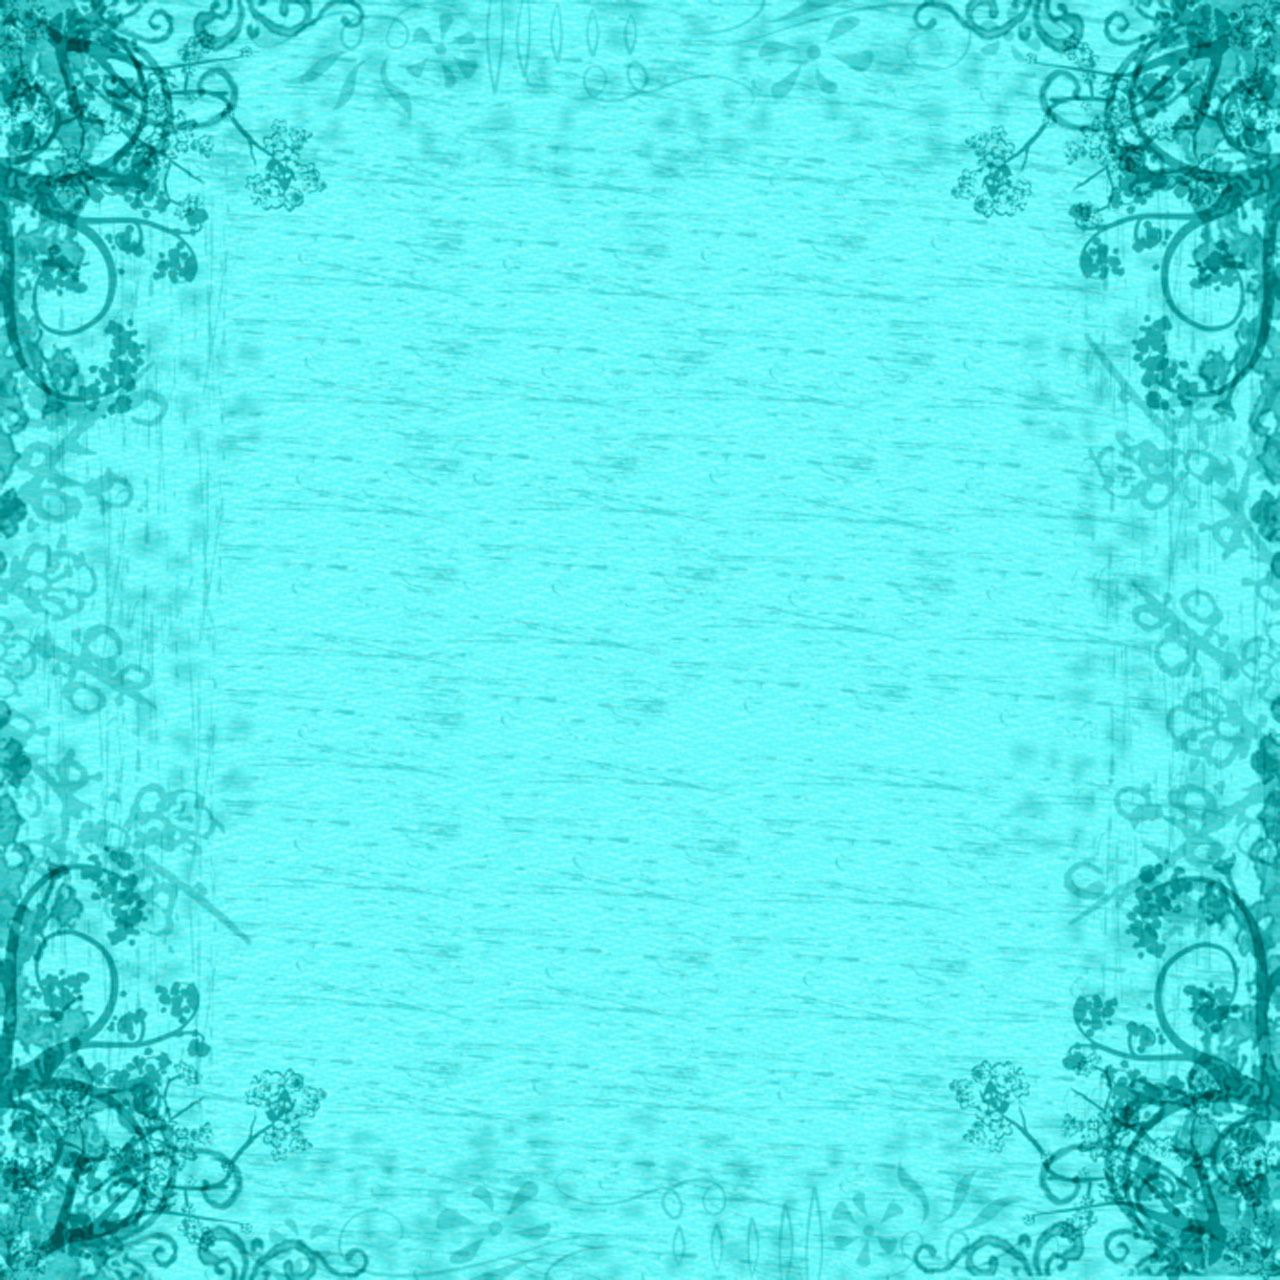 Teal Pattern Photos Image Background For Powerpoint